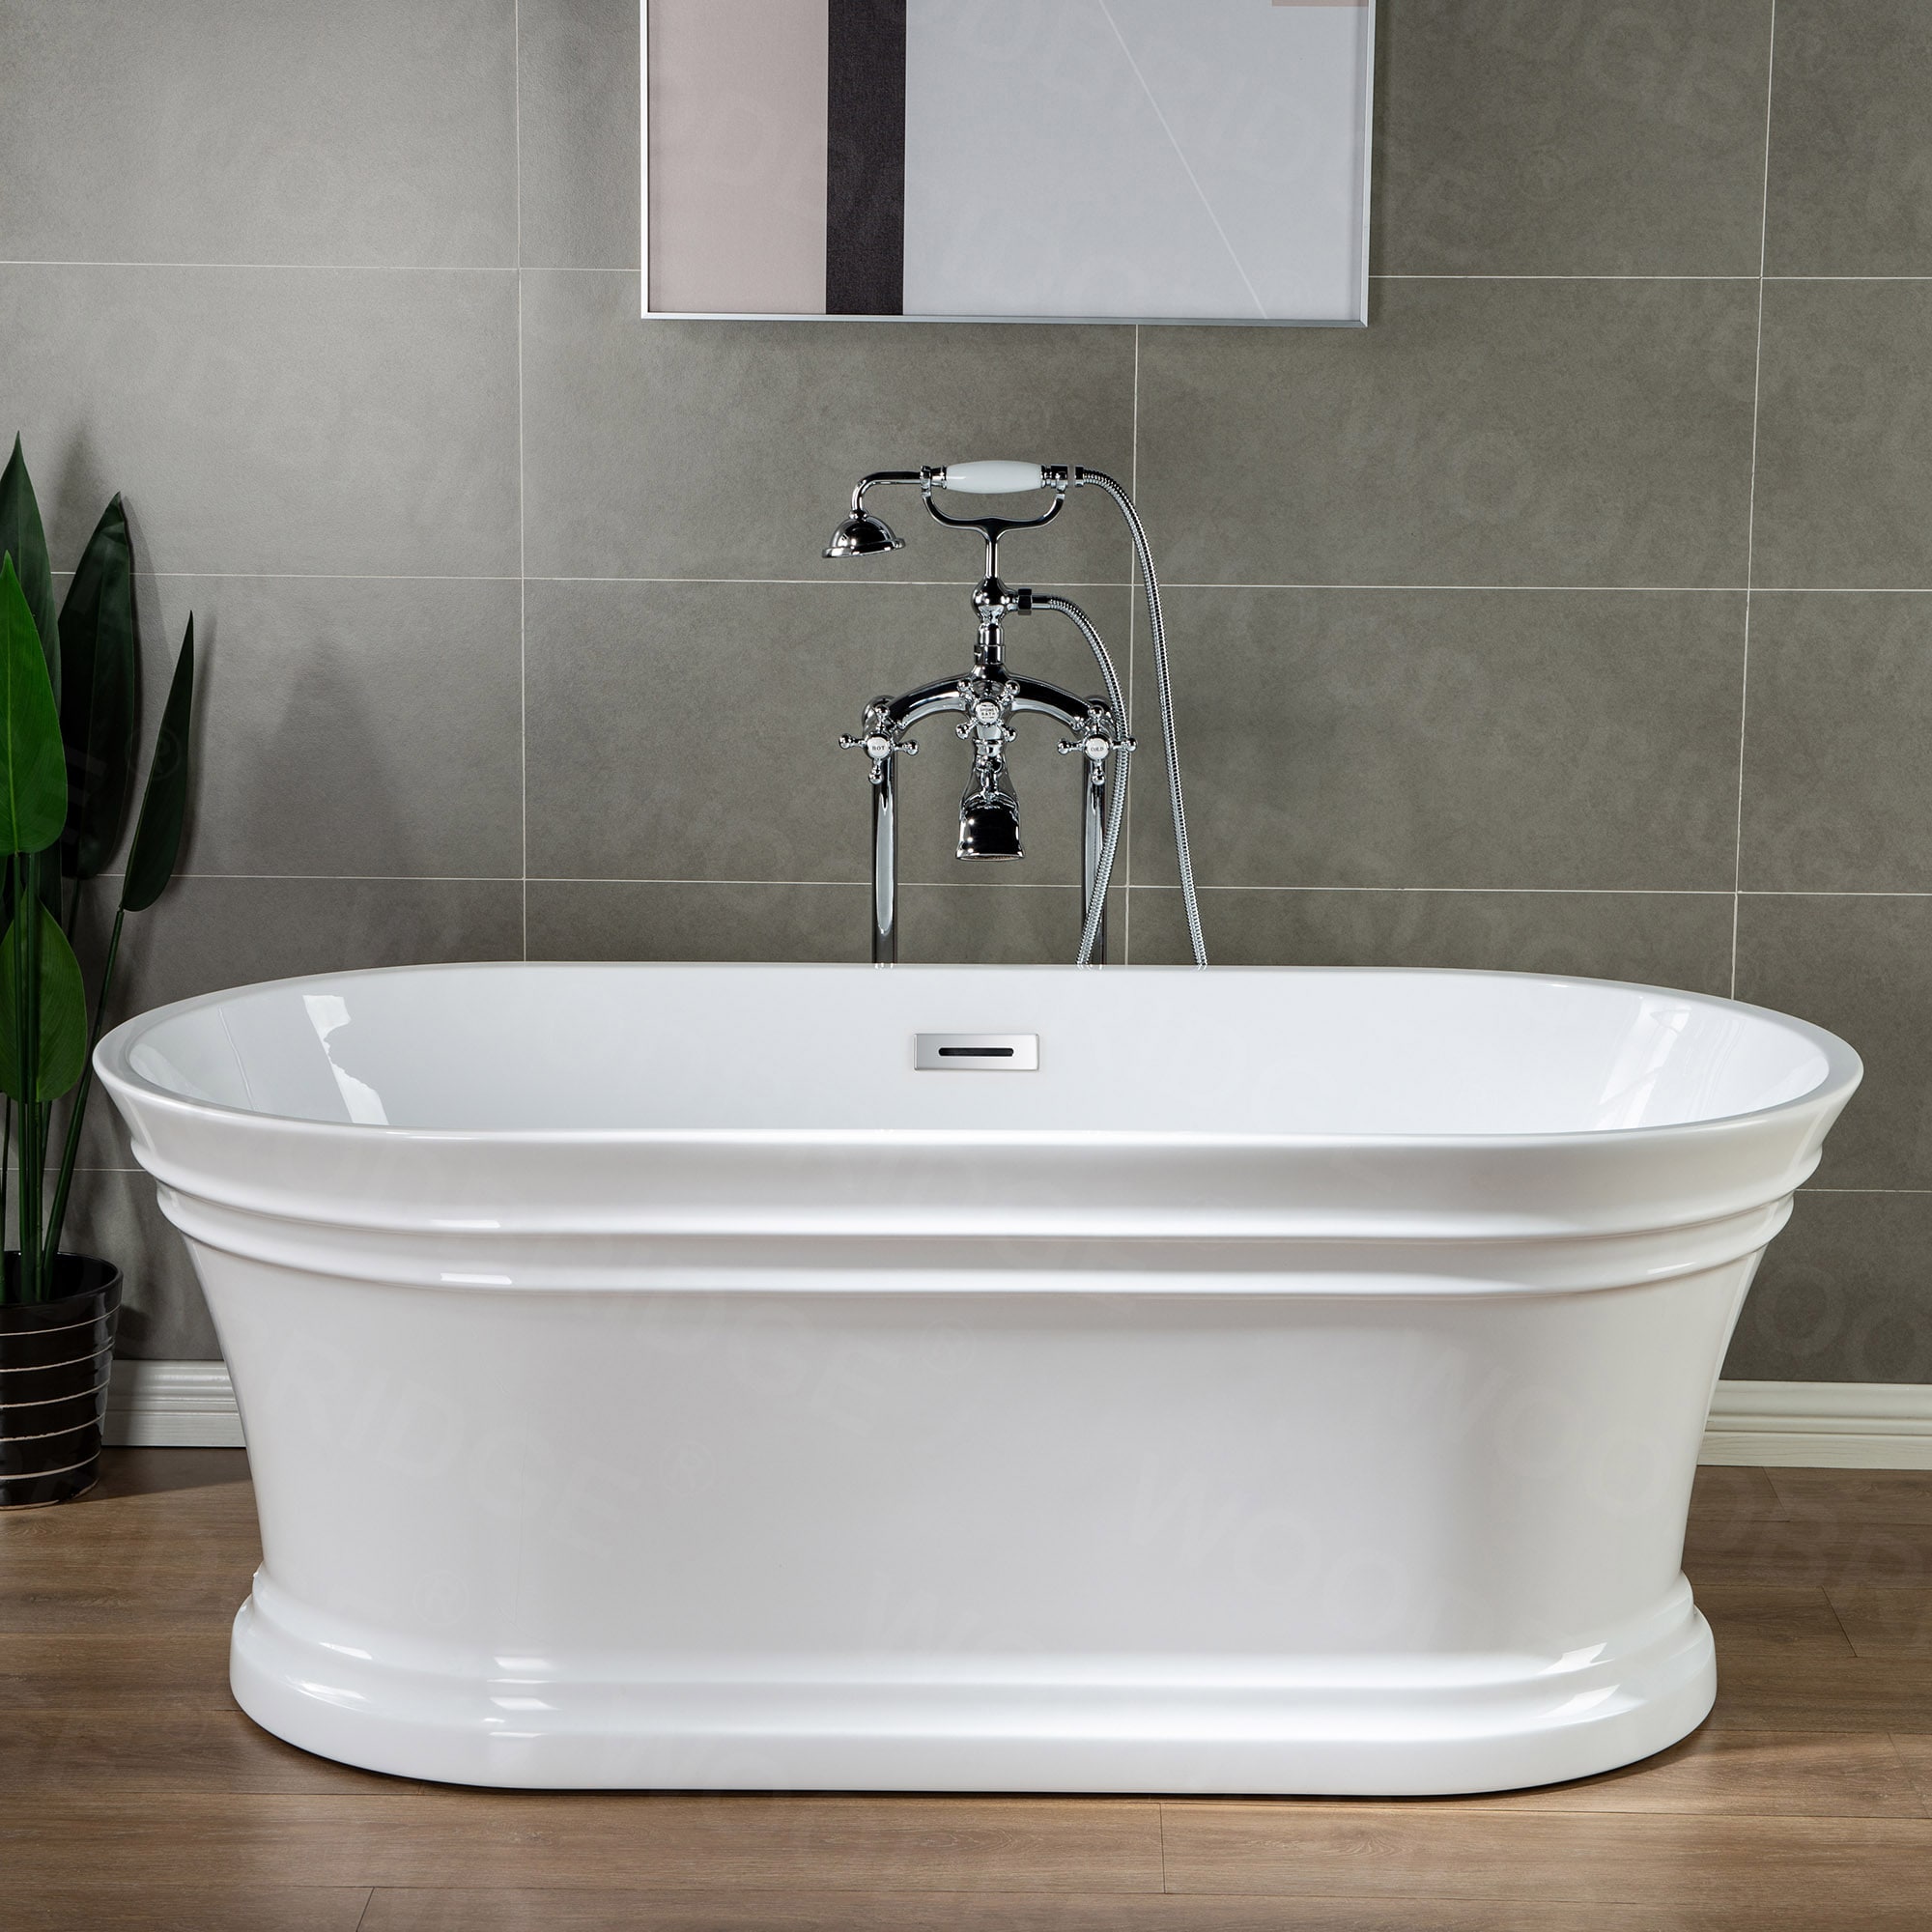 Salem 29.875-in x 67-in White with Gold Trim Acrylic Oval Clawfoot Soaking Bathtub with Drain (Reversible Drain) Stainless Steel | - Woodbridge LB384